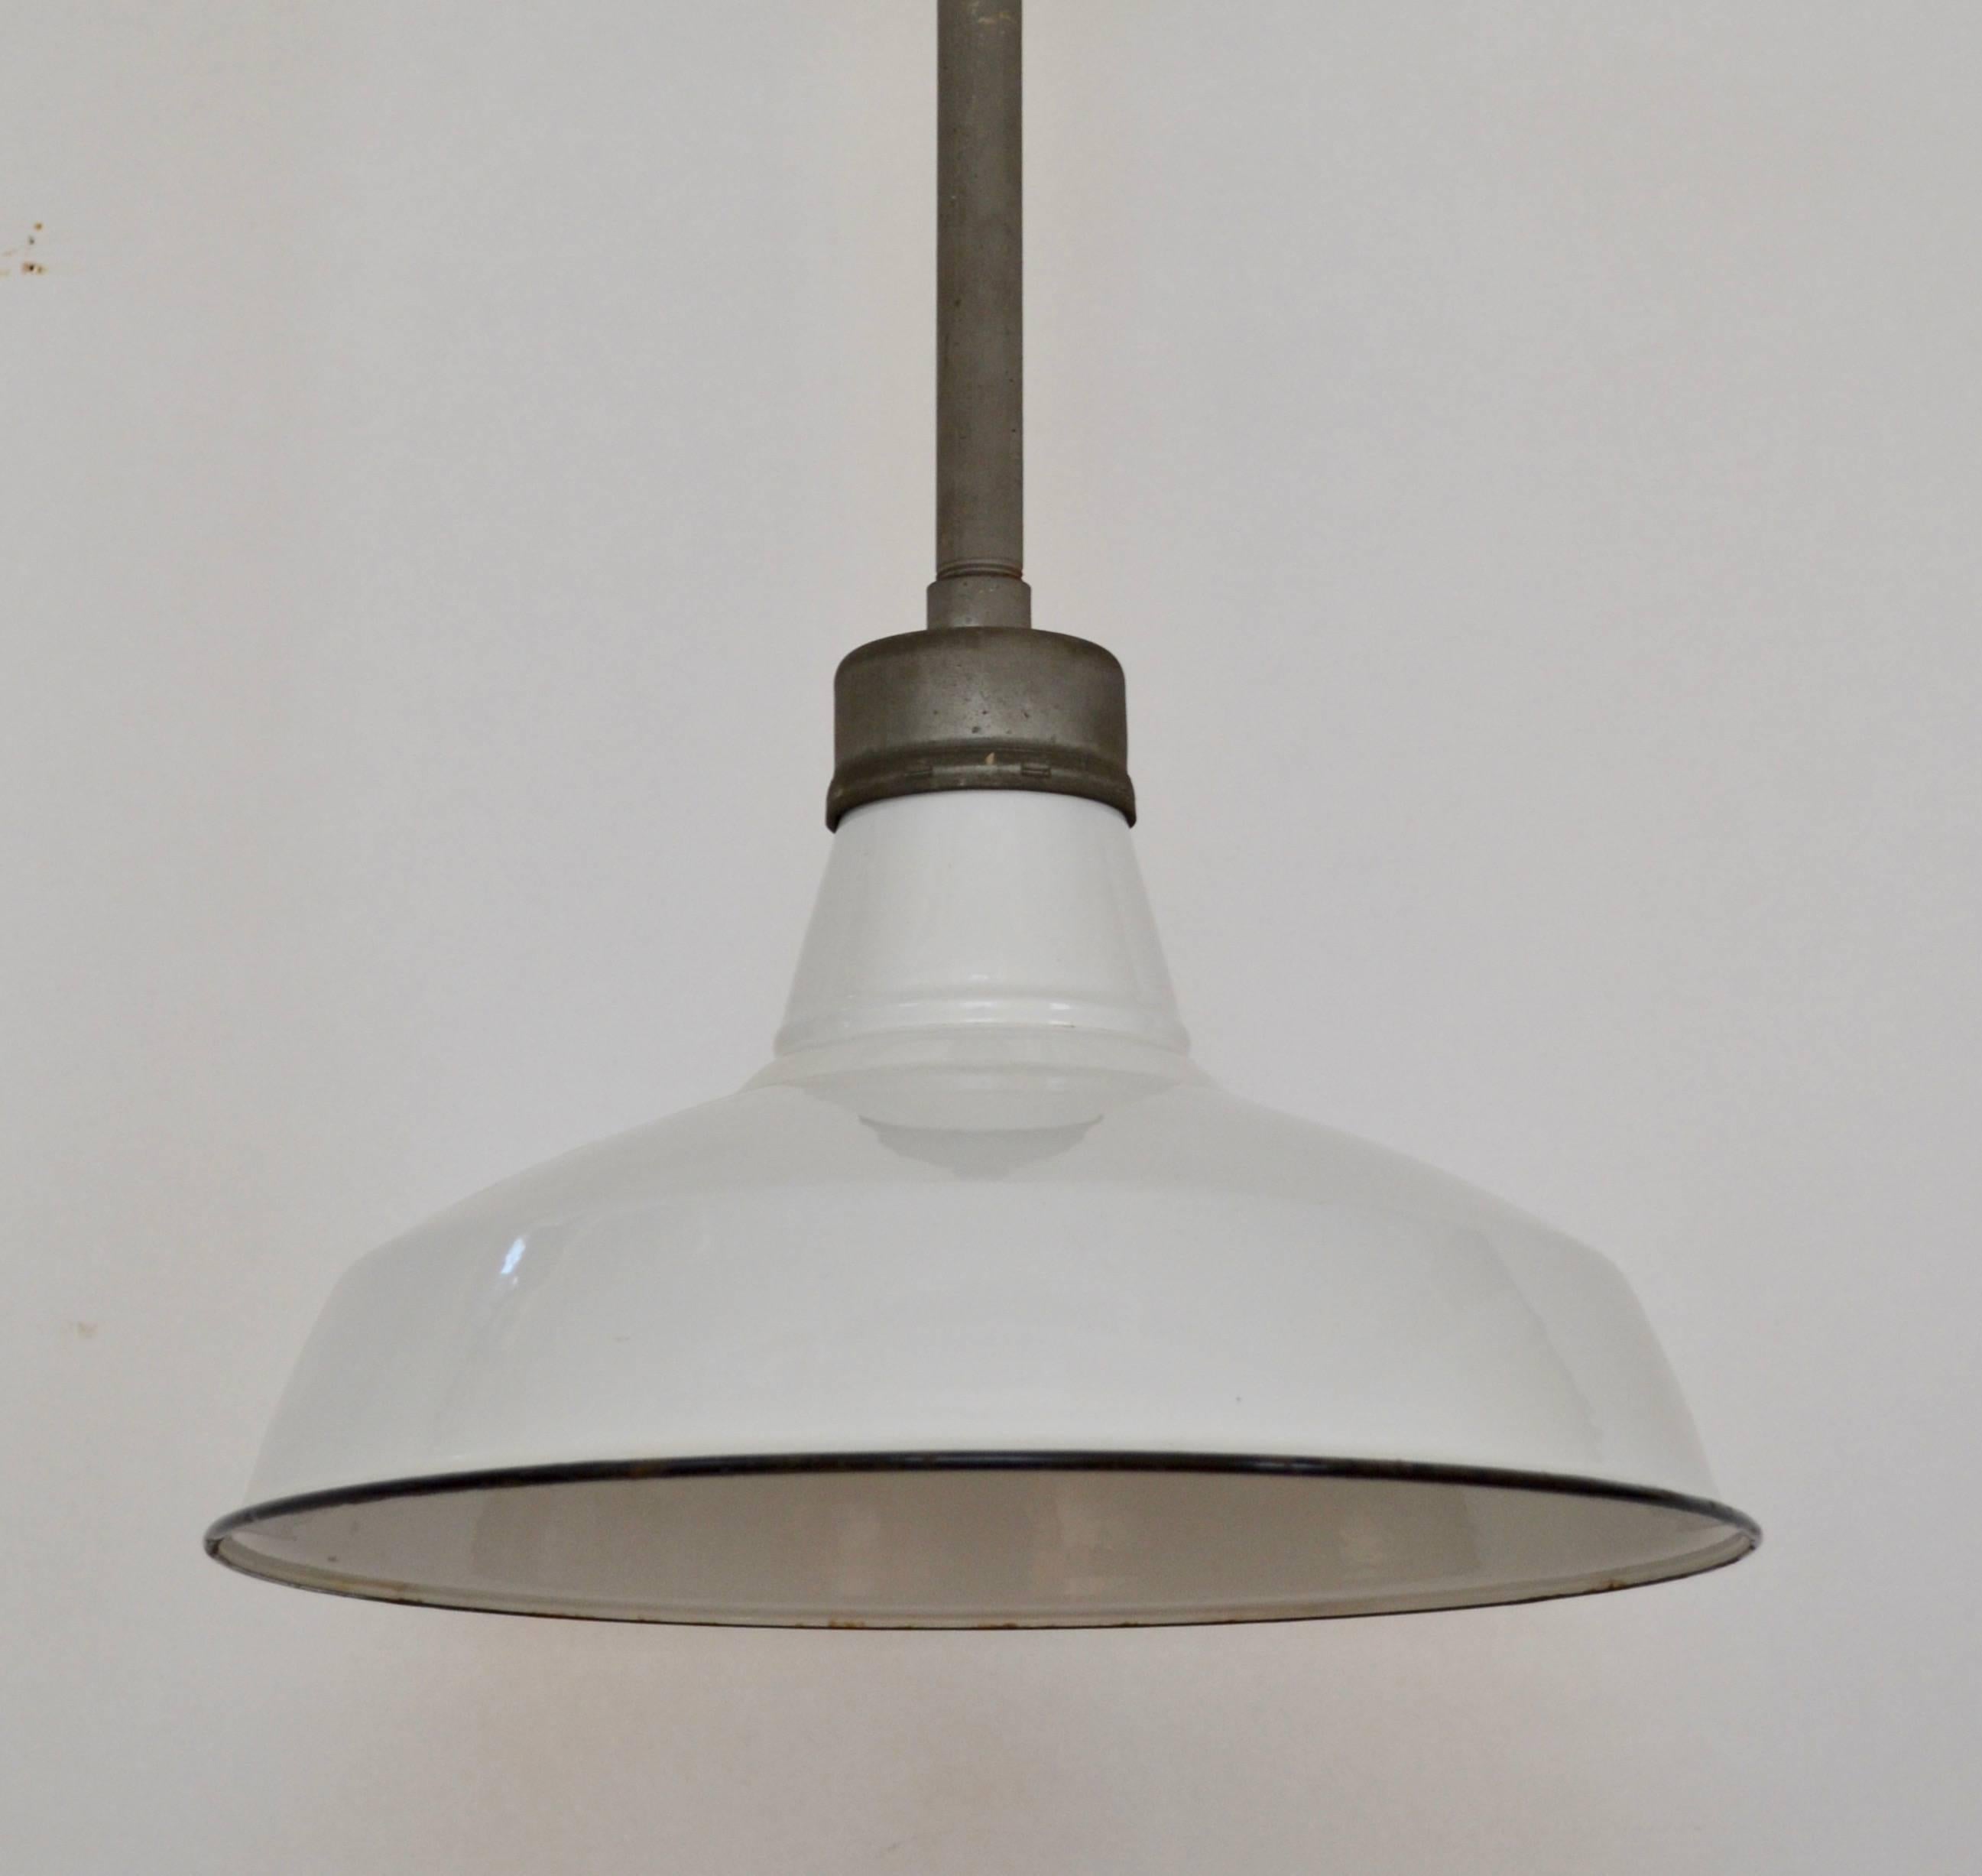 Appleton electric, perhaps best known for their specialty explosion proof fixtures also had a general service line of which these lights are a particularly clean example. Many still retain their original paper labels. Along with the Benjamin